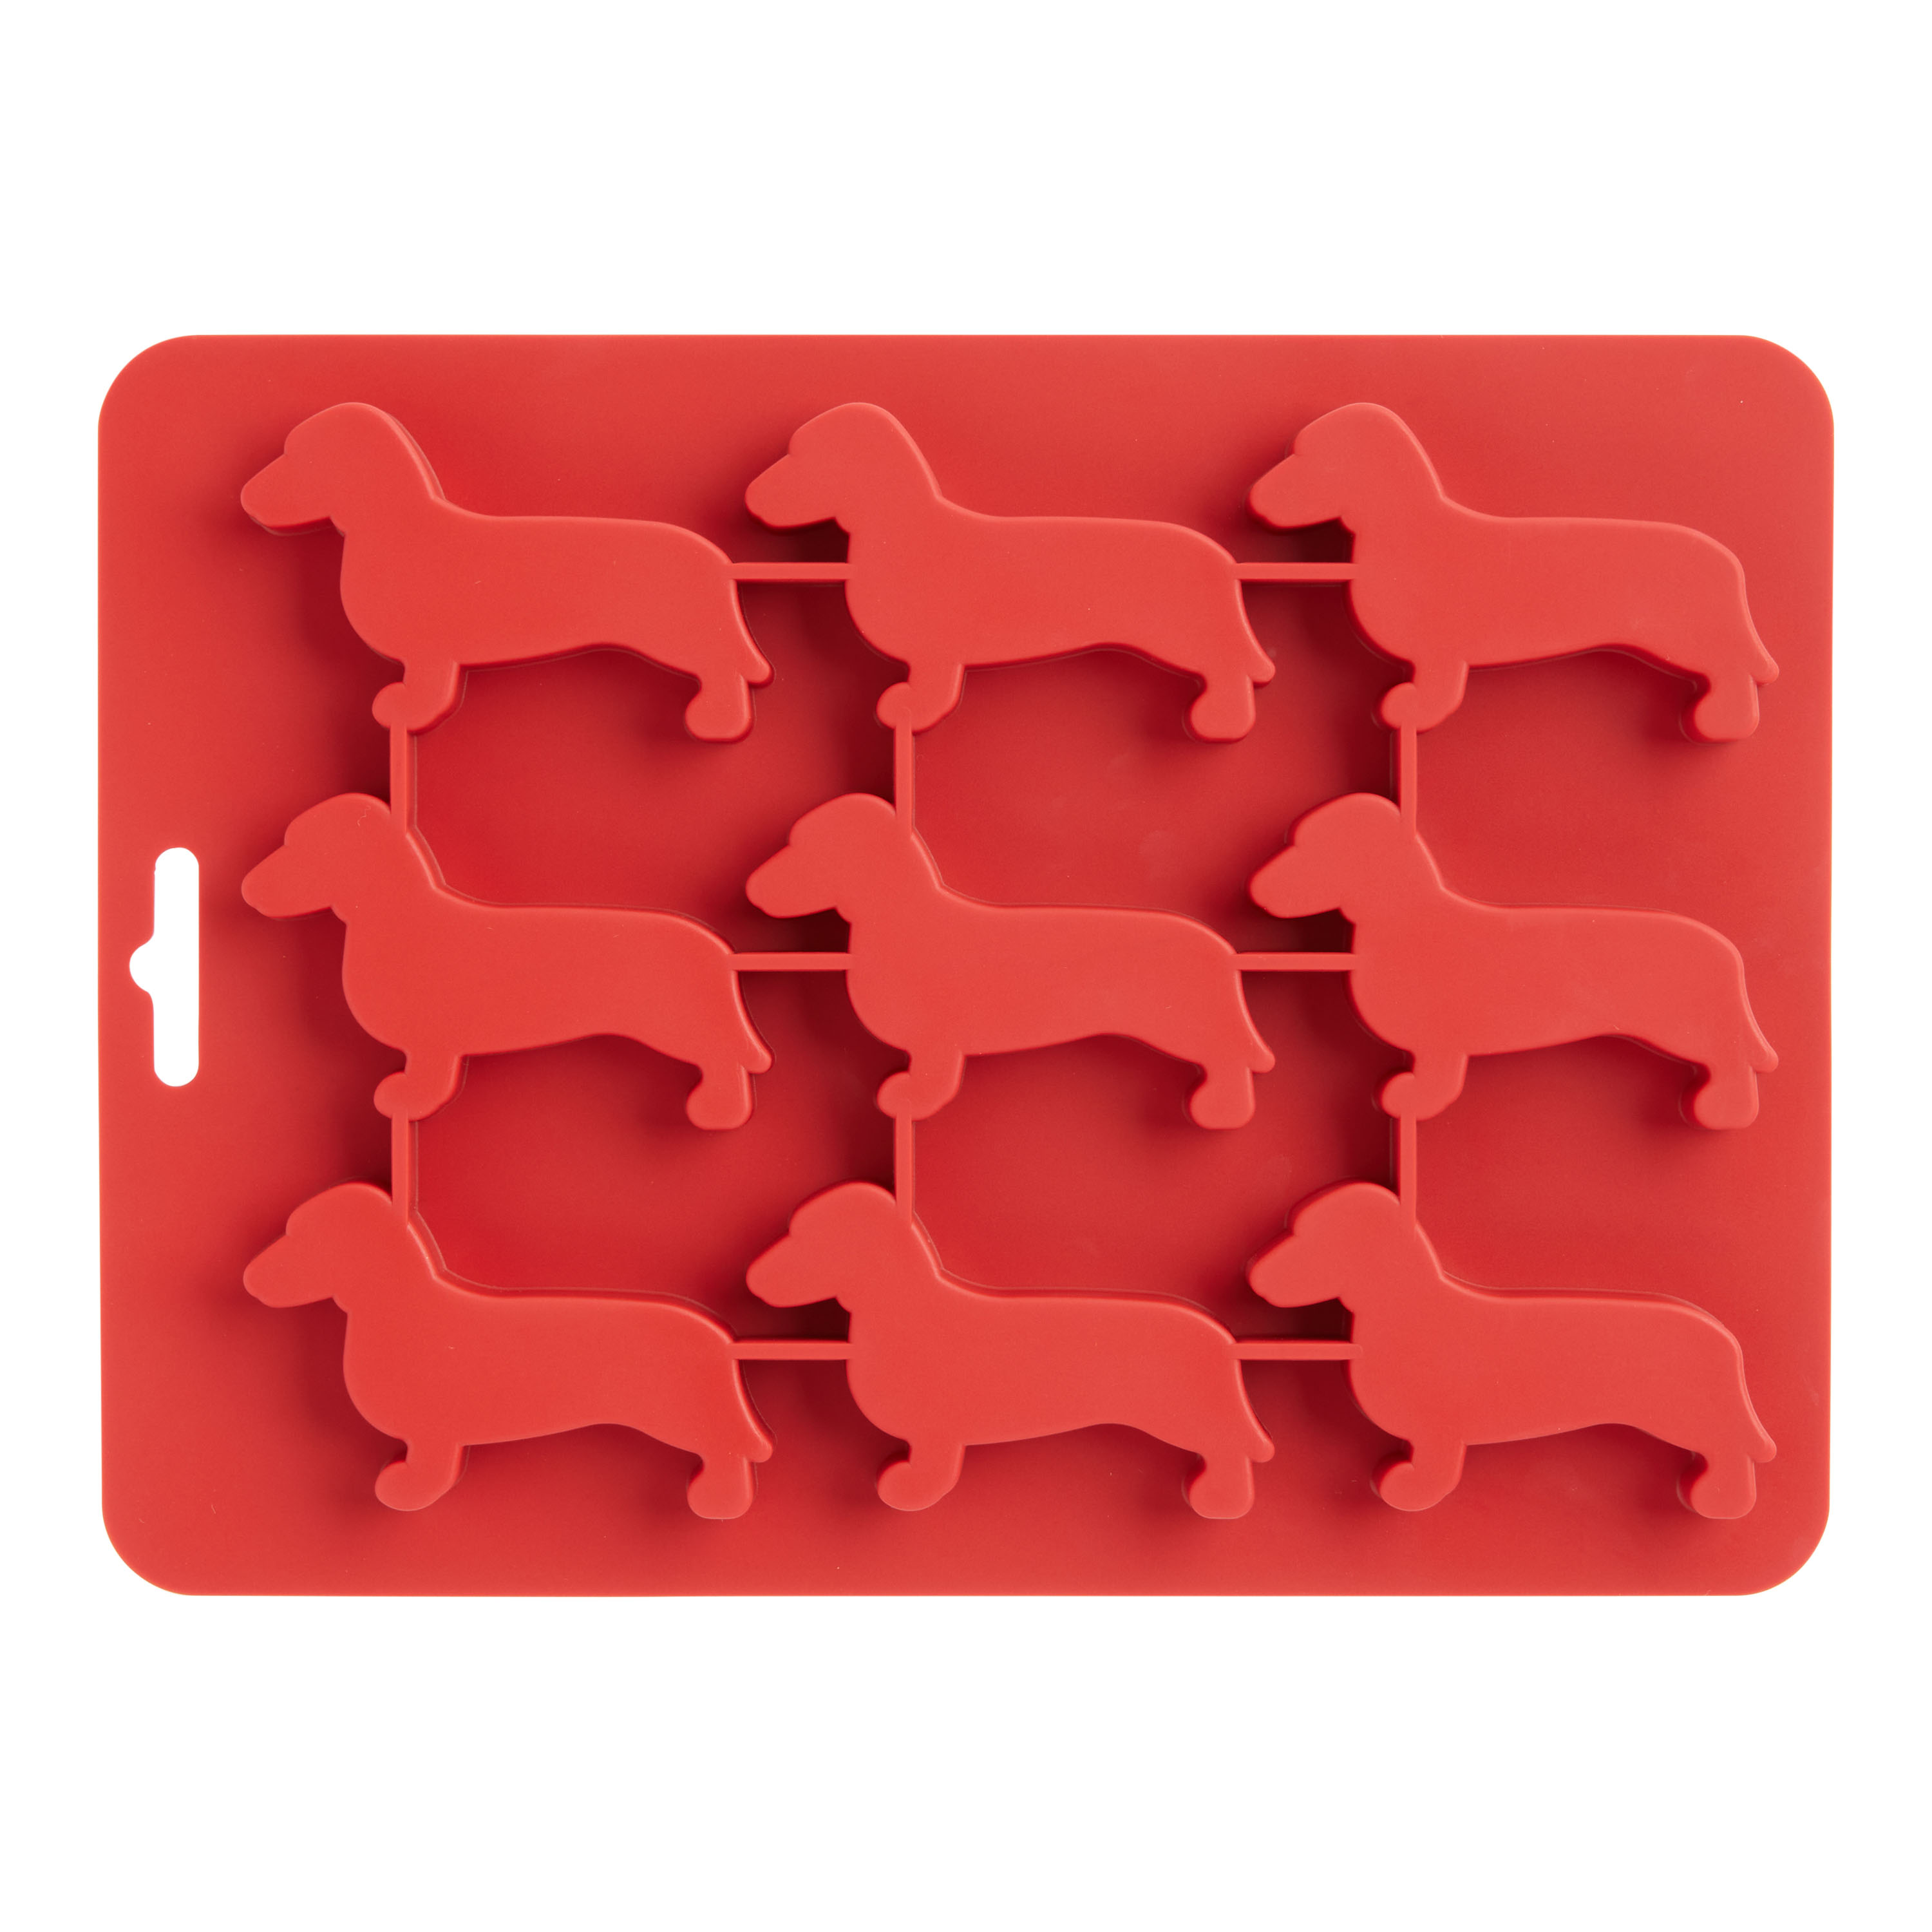 Silicone Ice Tray / Mold - 1.75 Cube - 4 Molds - 1 Count Box